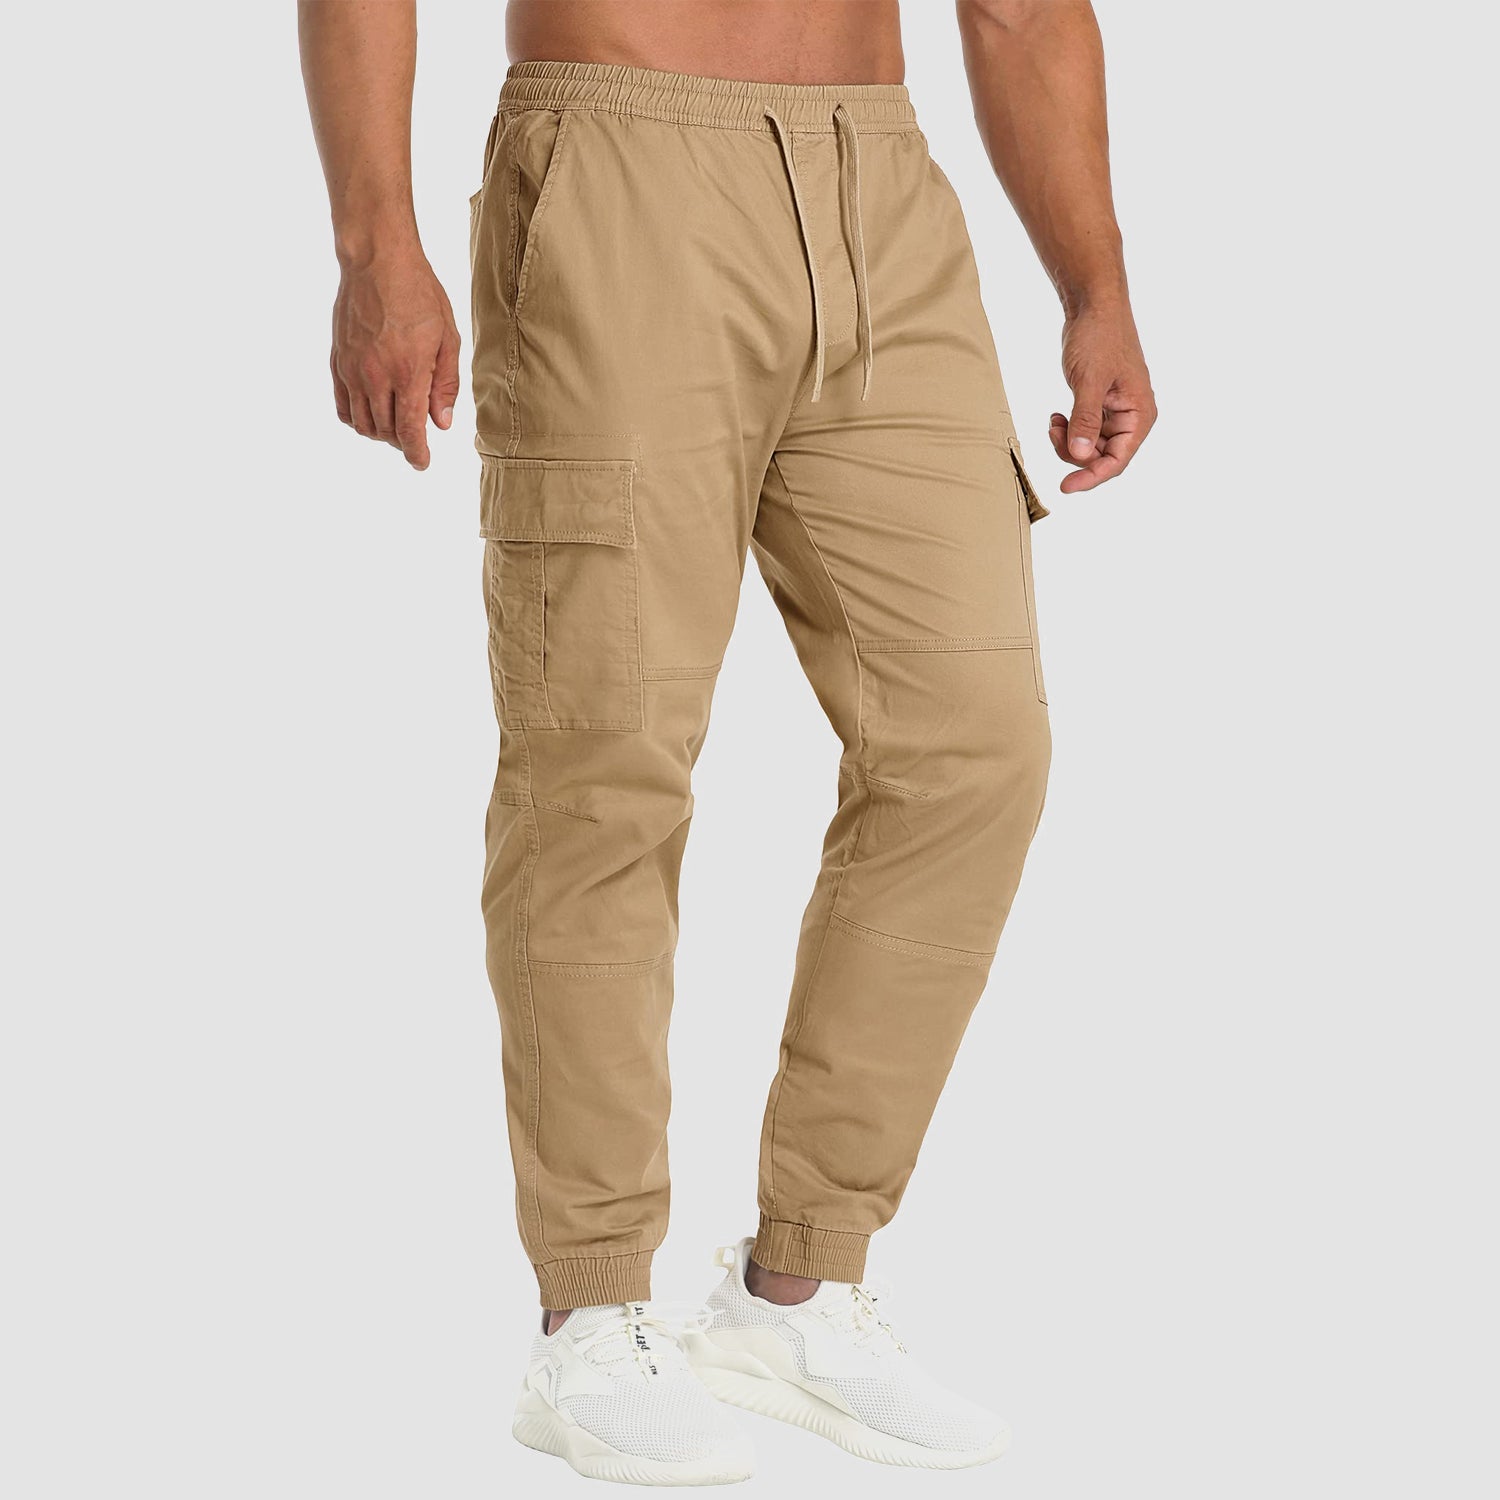 https://magcomsen.com/cdn/shop/products/Men_s-Cargo-Pants-Elastic-Waist-Hiking-Ripstop-Outdoor-Casual-Fishing-Pant-with-5-Pockets_10.jpg?v=1662436181&width=1500